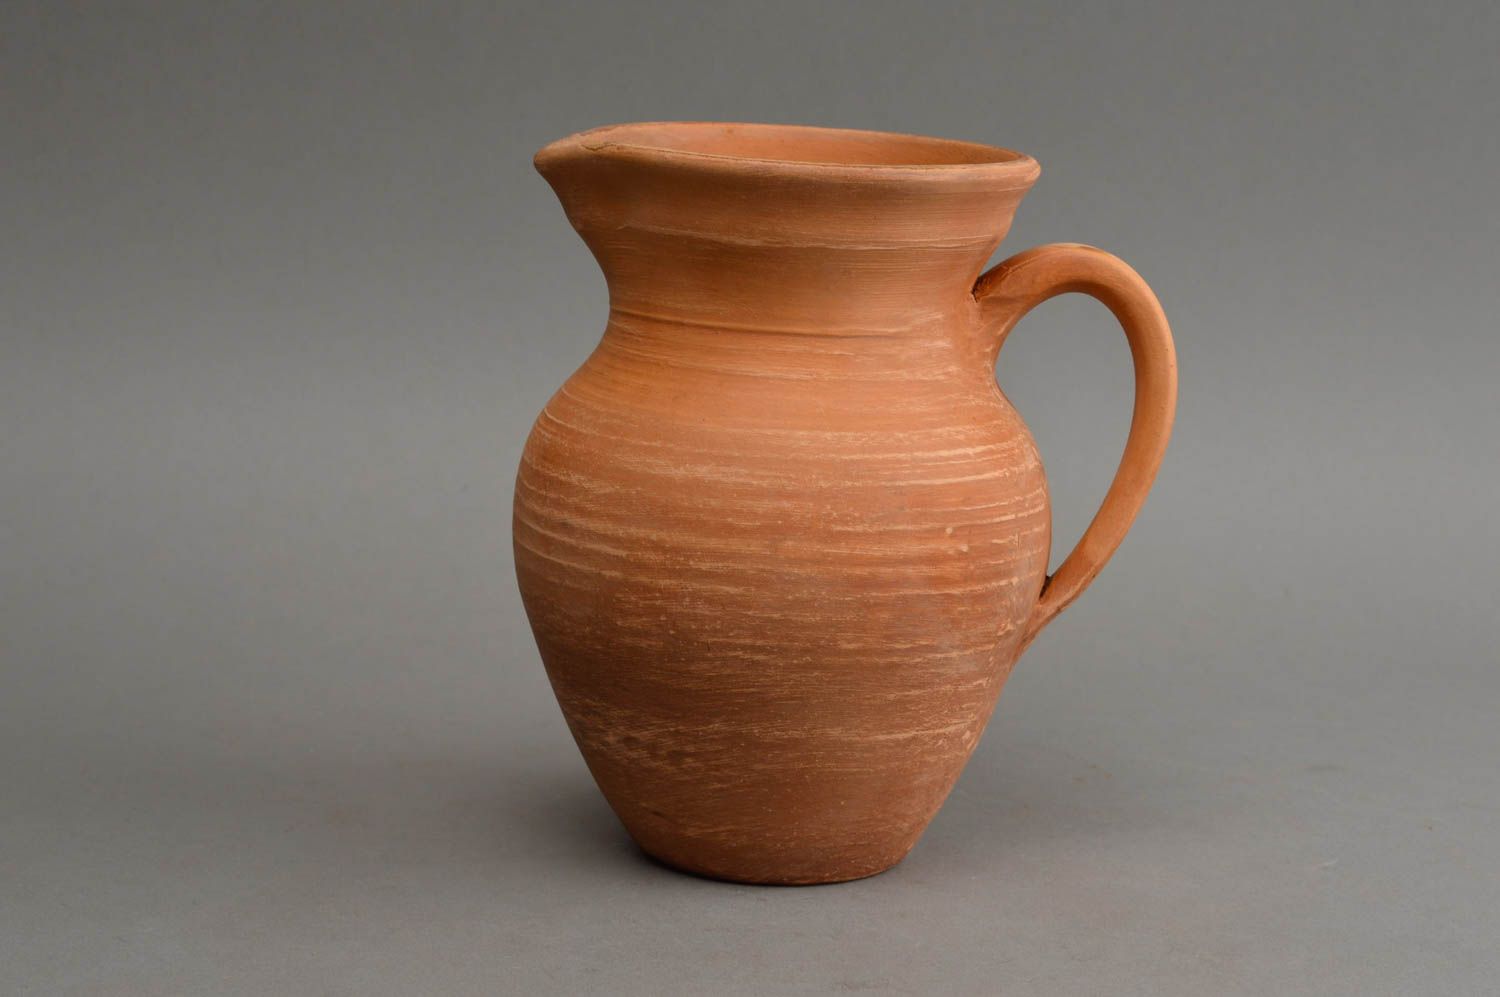 Handmade earth clay village-style water jug with handle in terracotta color 6 inches 1 lb photo 2